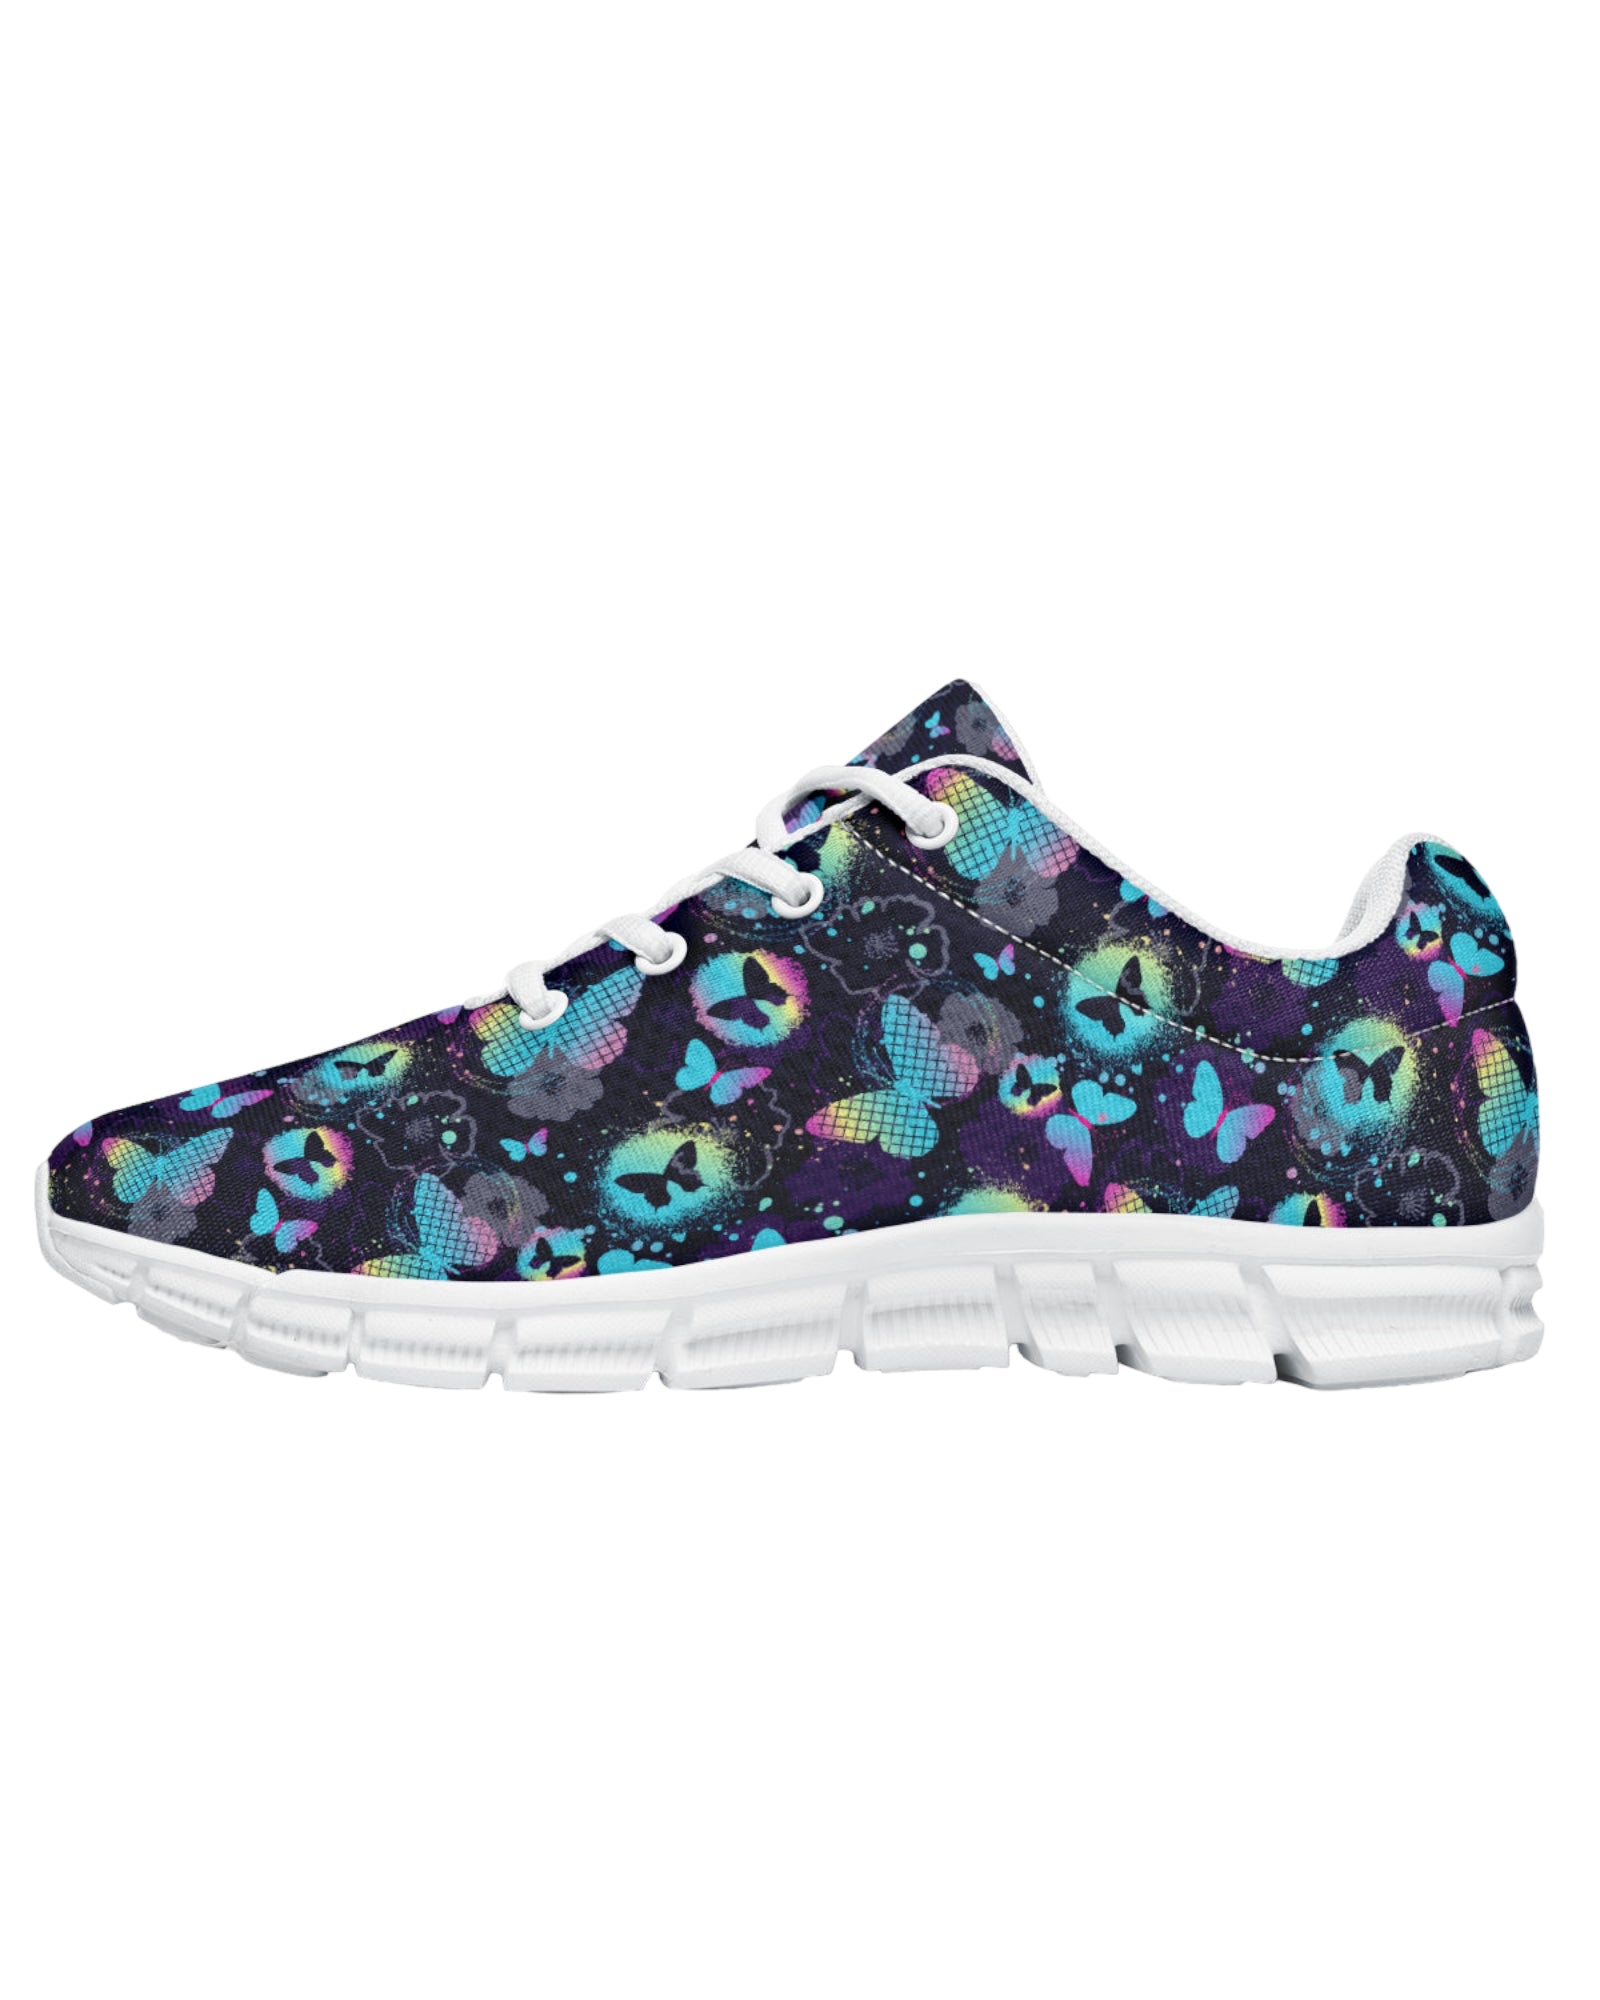 Painted Butterfly Festival Sneakers